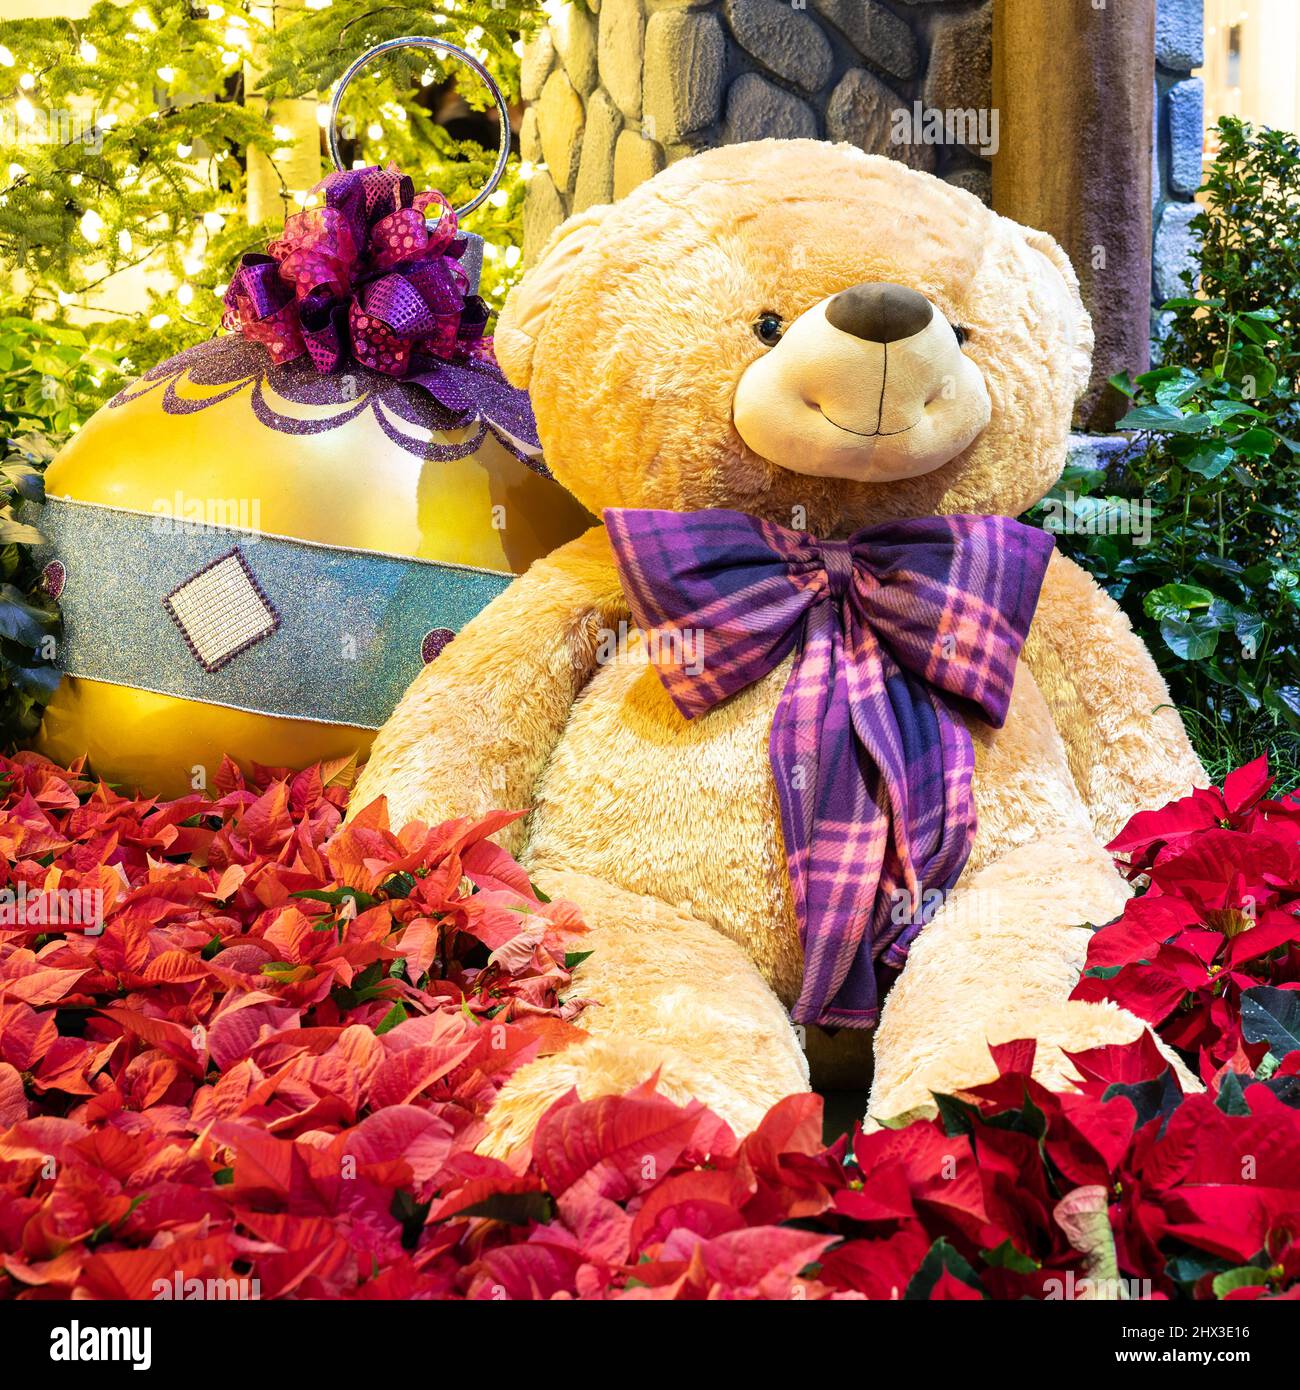 Las Vegas, NV - Dec 12, 2021: This large teddy bear and giant Christmas ball amid red poinsettias is part of the 'Holiday Time' display at the Bellagi Stock Photo